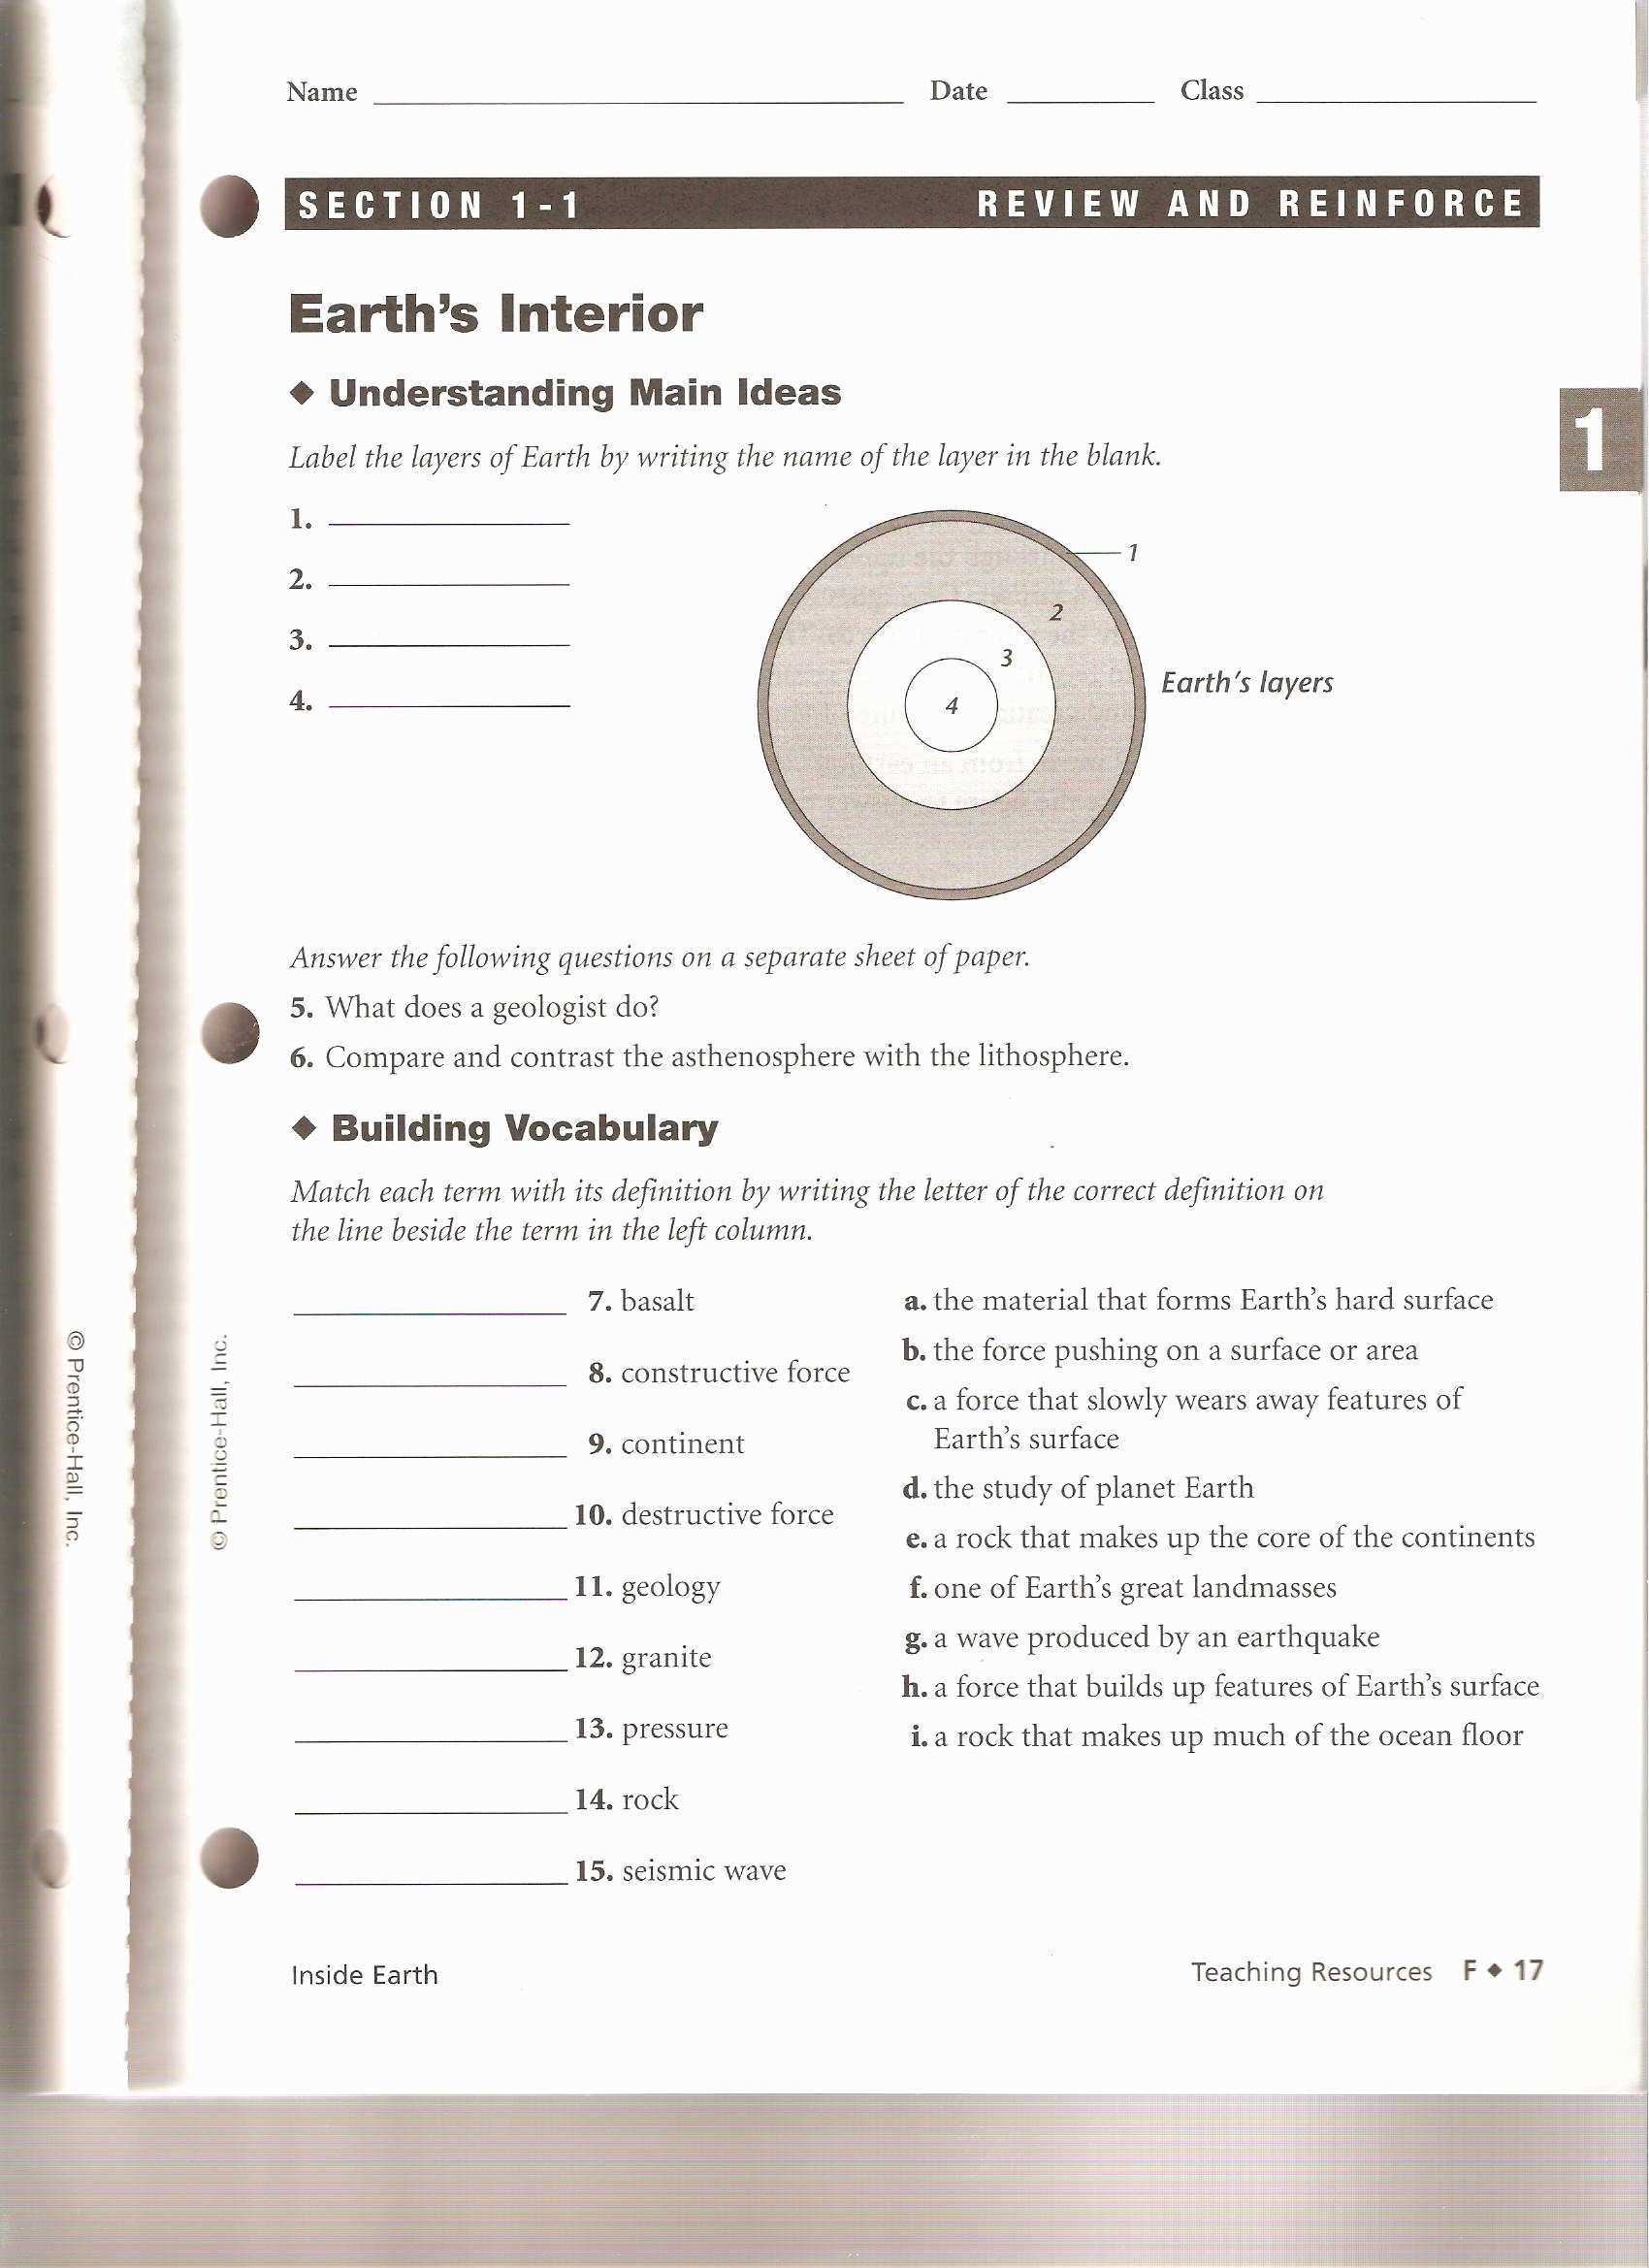 Pearson Education Inc Worksheet Answers Along with 15 Inspirational Answer Sheet for Math